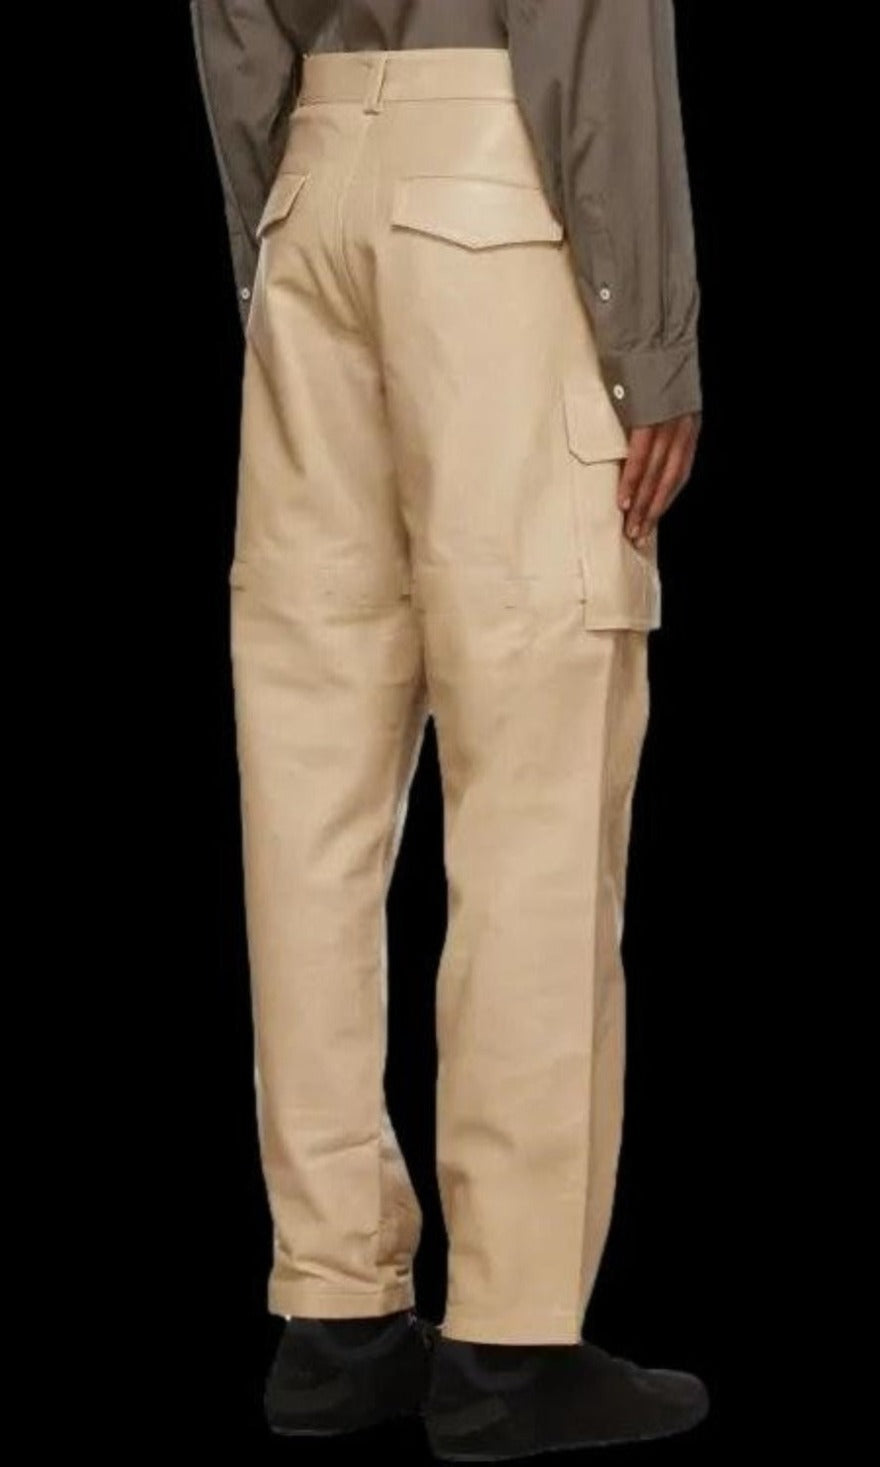 Picture of a model wearing our white leather cargo pants, back view. with black background for contrast.